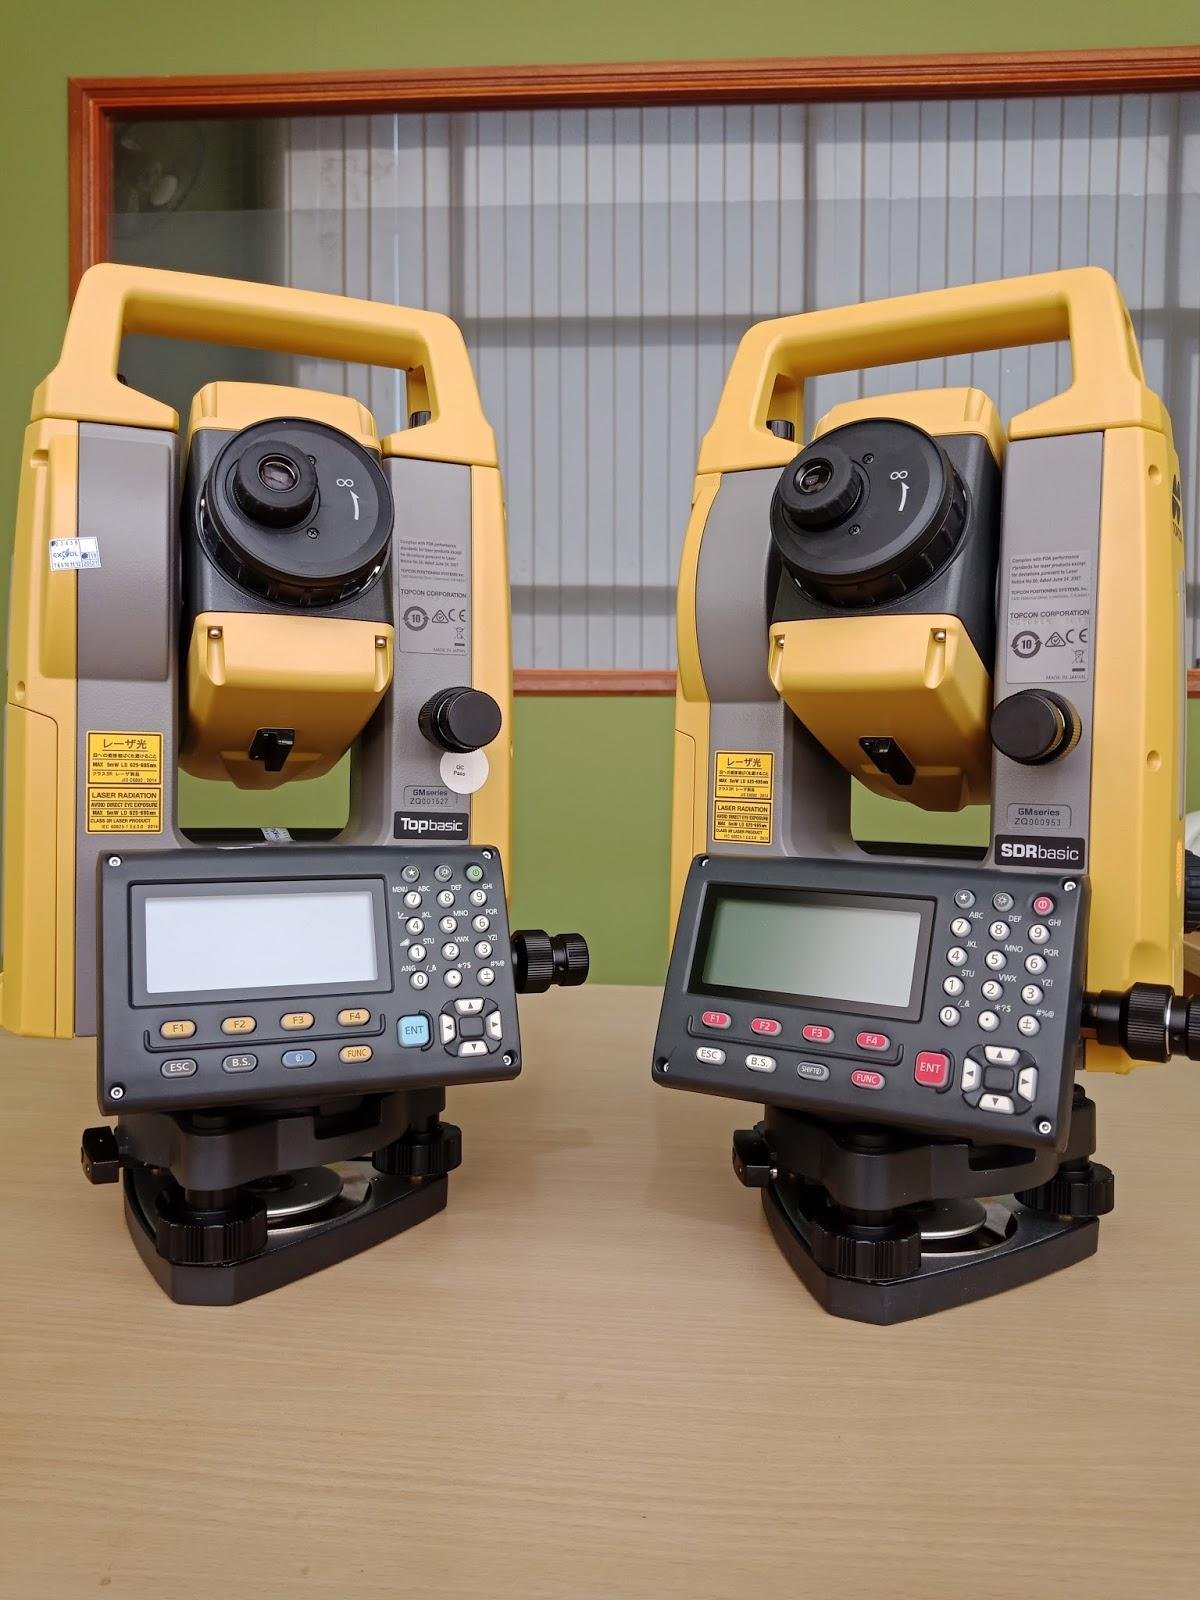 Topcon GM105 Powerful Total Station non prism total station 4